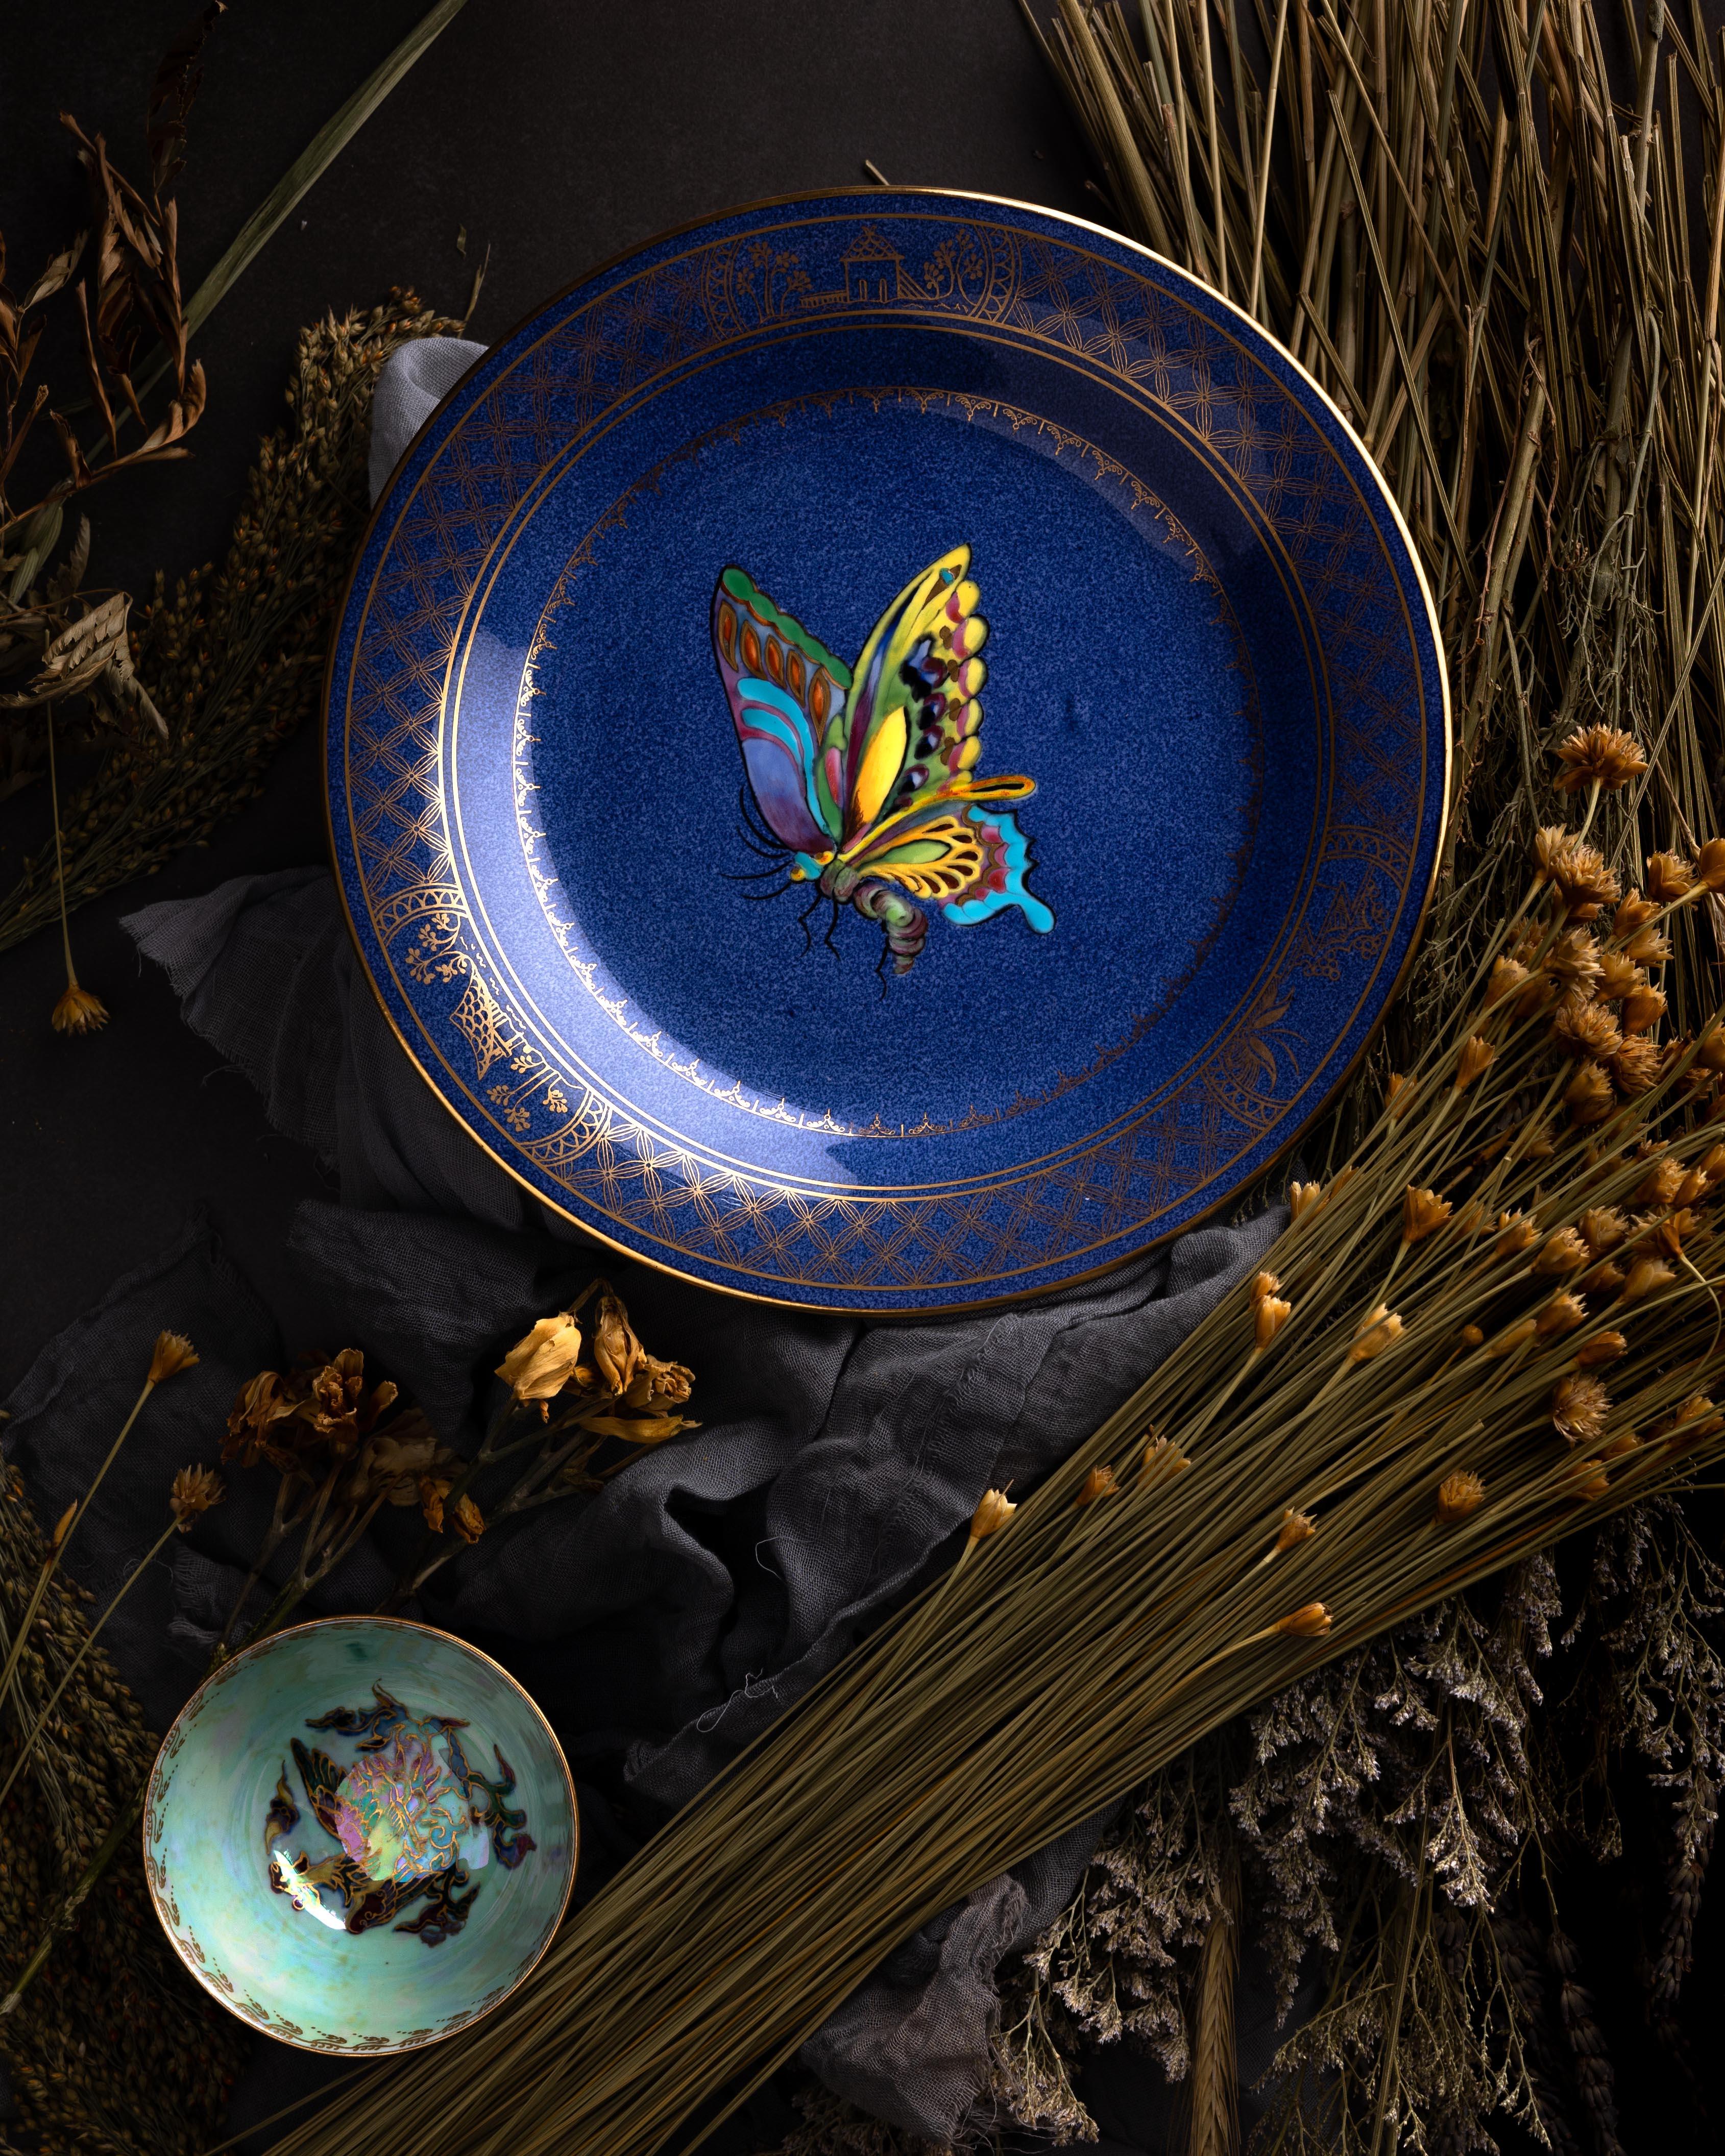 A pair of powder blue ‘Butterfly’ plates designed by Daisy Makeig-Jones for Wedgwood, circa 1920.

These whimsical plates are just gorgeous, featuring beautifully polychromed butterflies for a colorful adaptation of Daisy Makeig-Jones’s